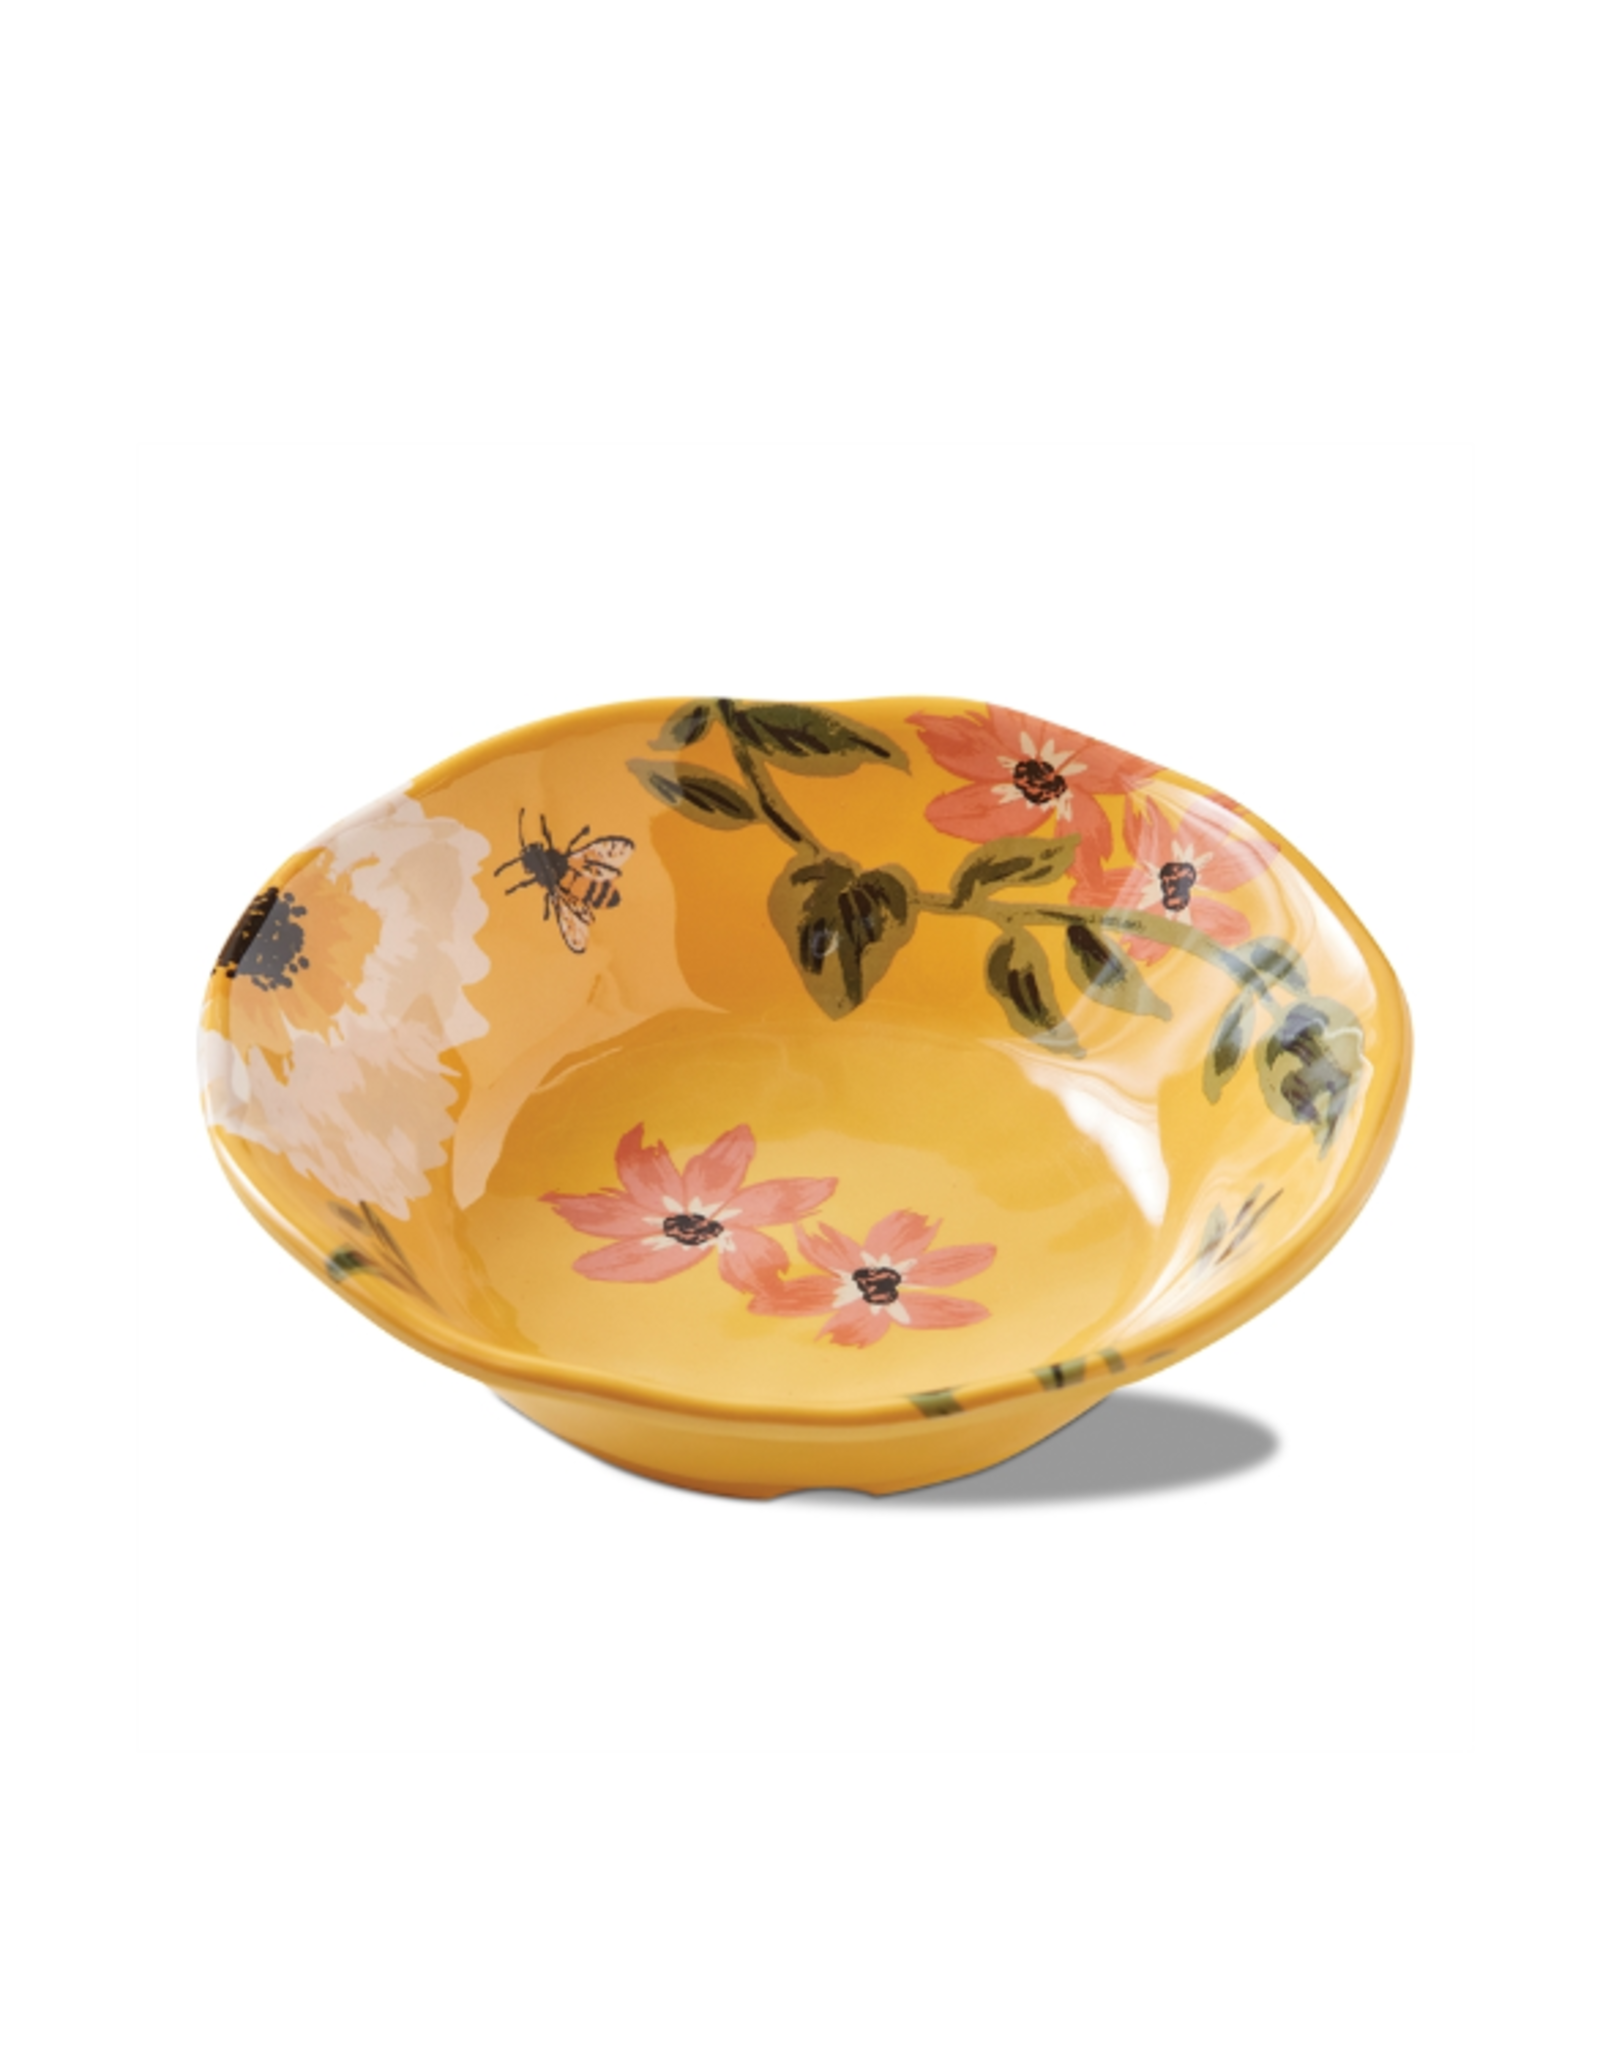 Tag Bowl S/4 - Bee Floral